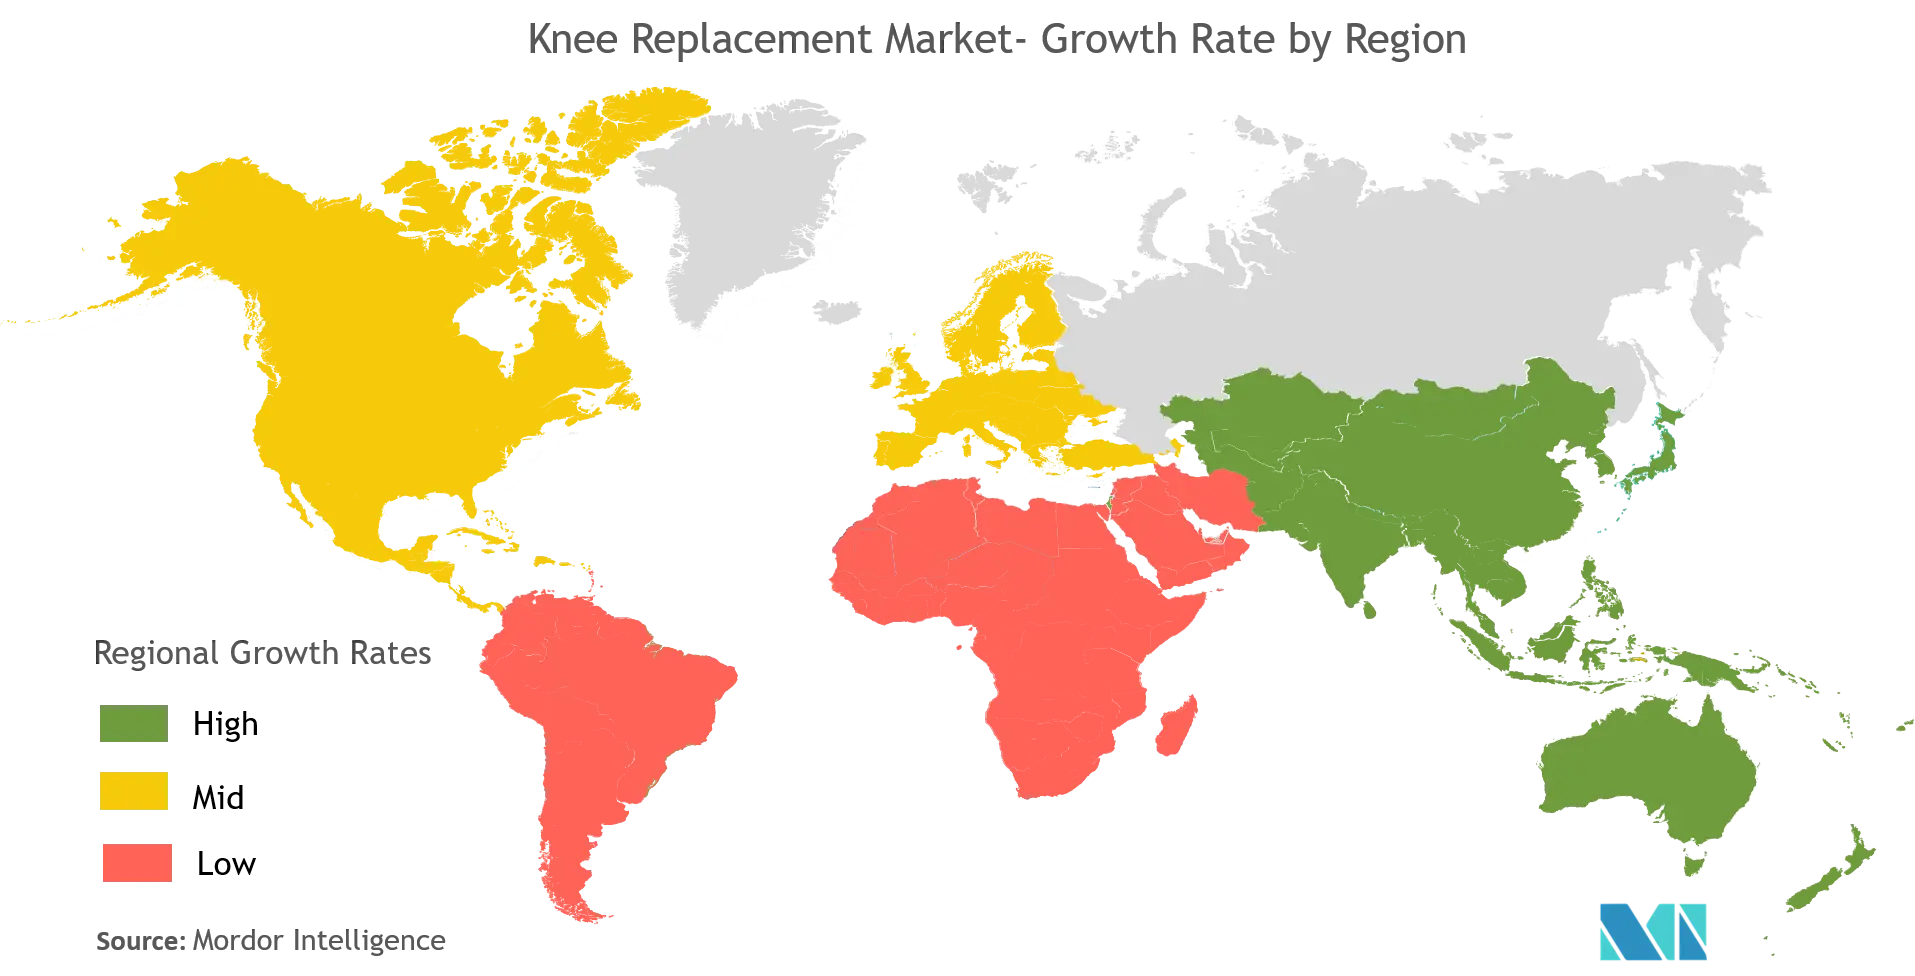 Knee Replacement Market Growth Rate